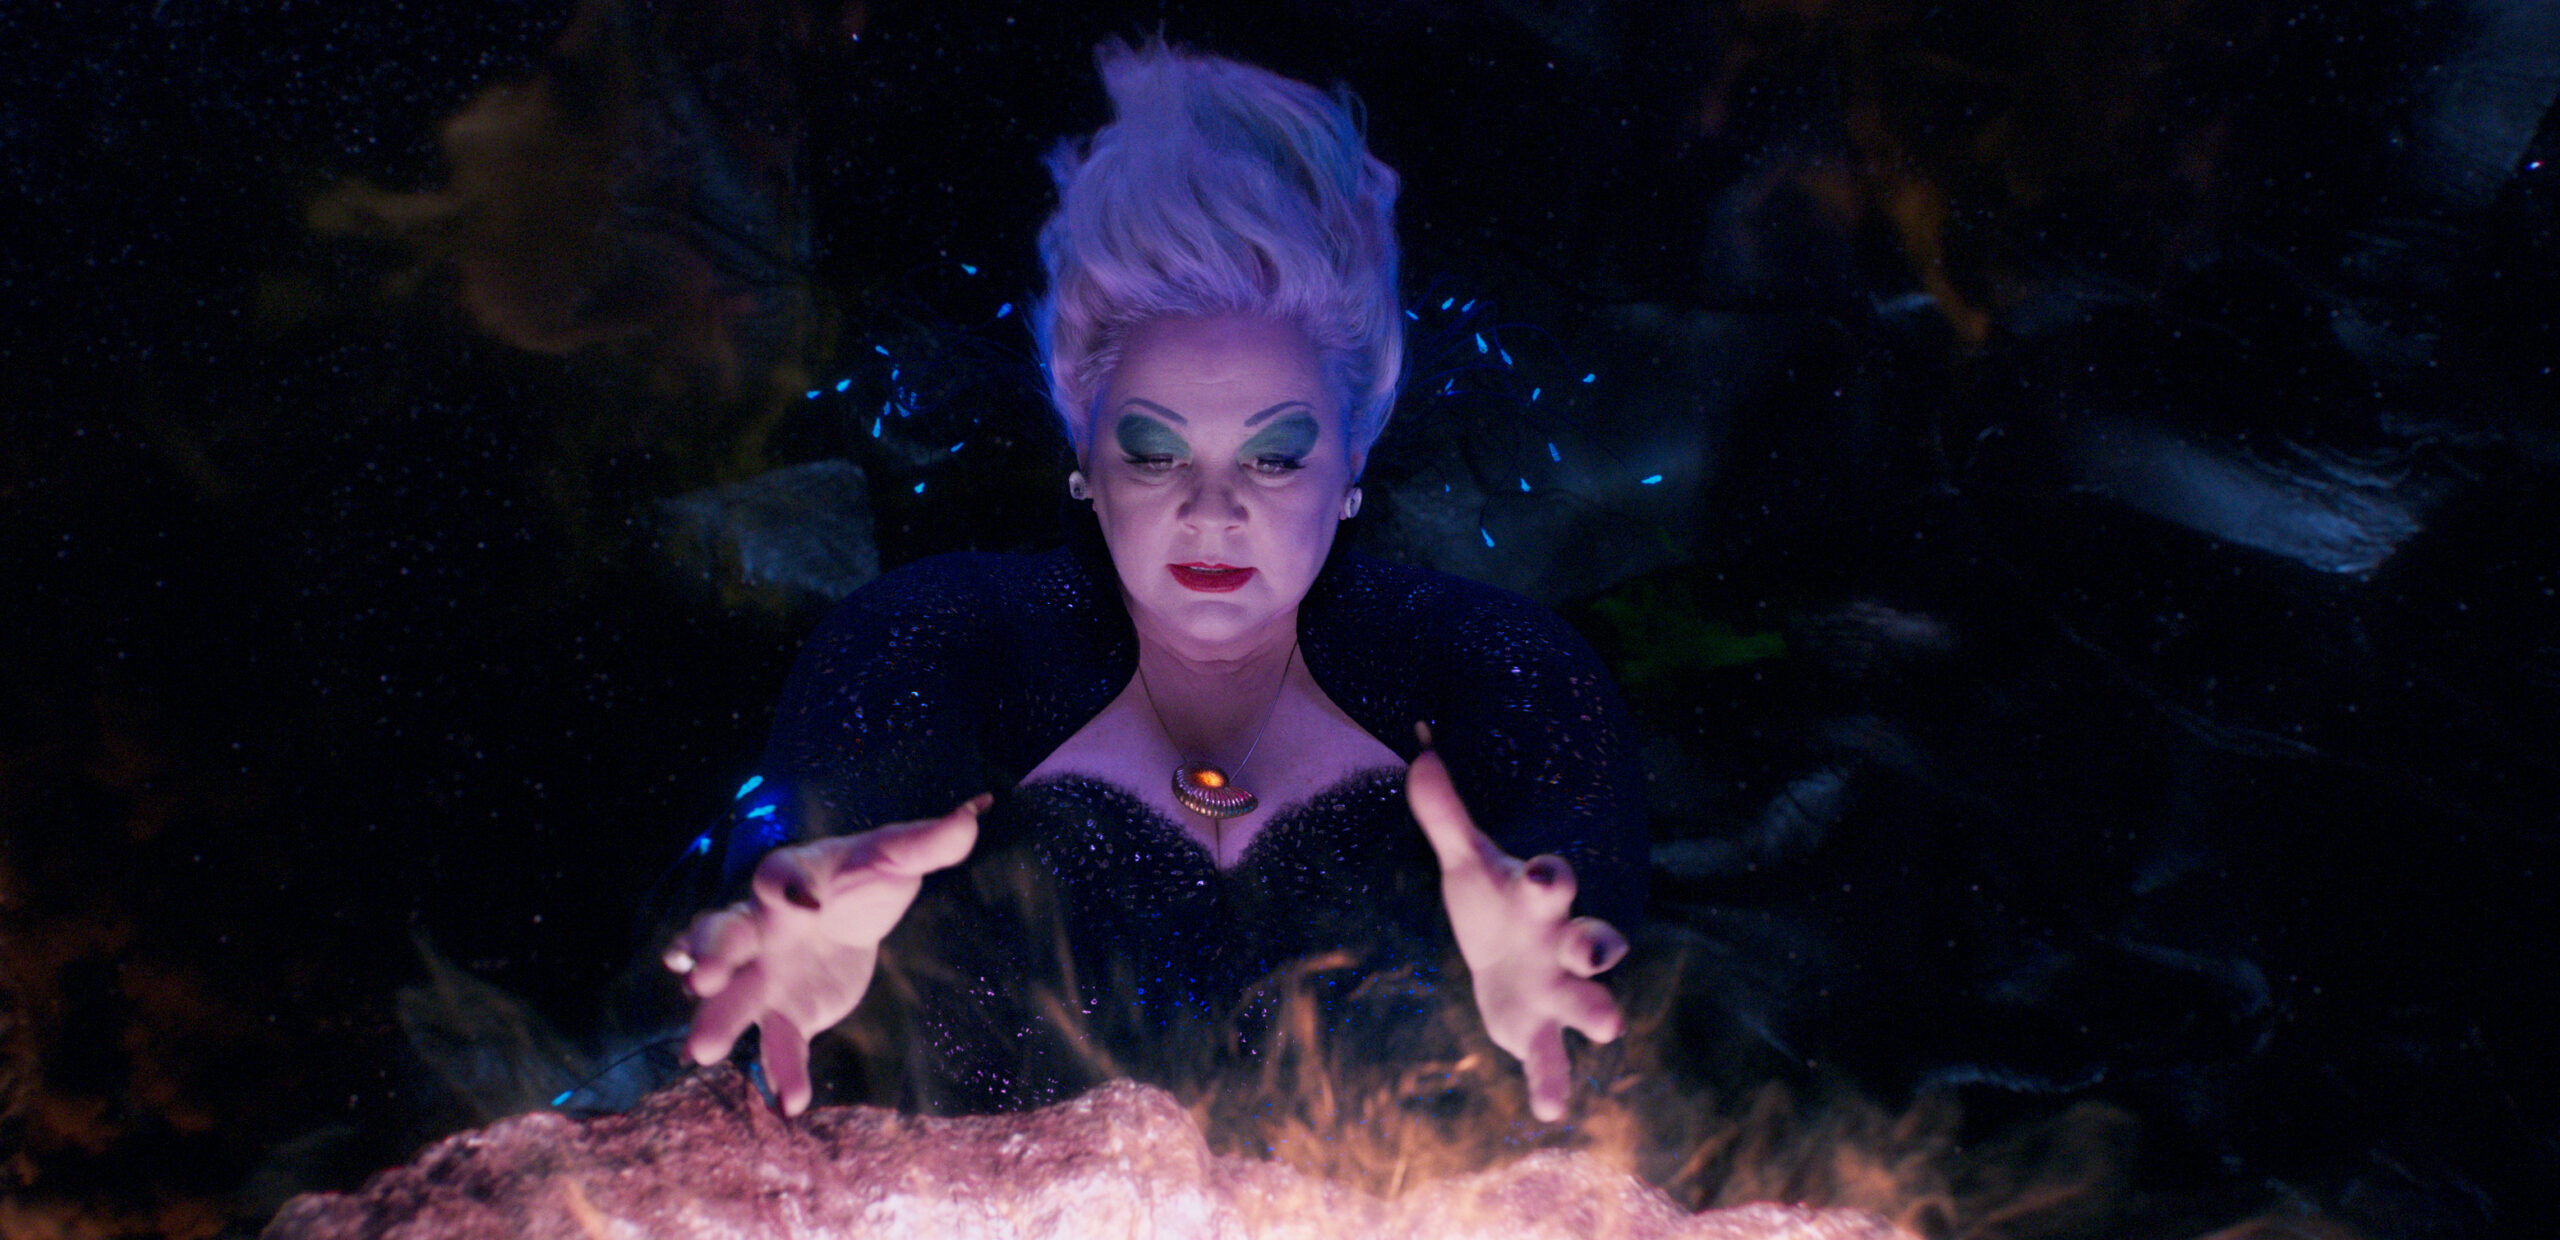 Melissa McCarthy as Ursula in Disney's live-action THE LITTLE MERMAID. Photo courtesy of Disney. © 2023 Disney Enterprises, Inc. All Rights Reserved.